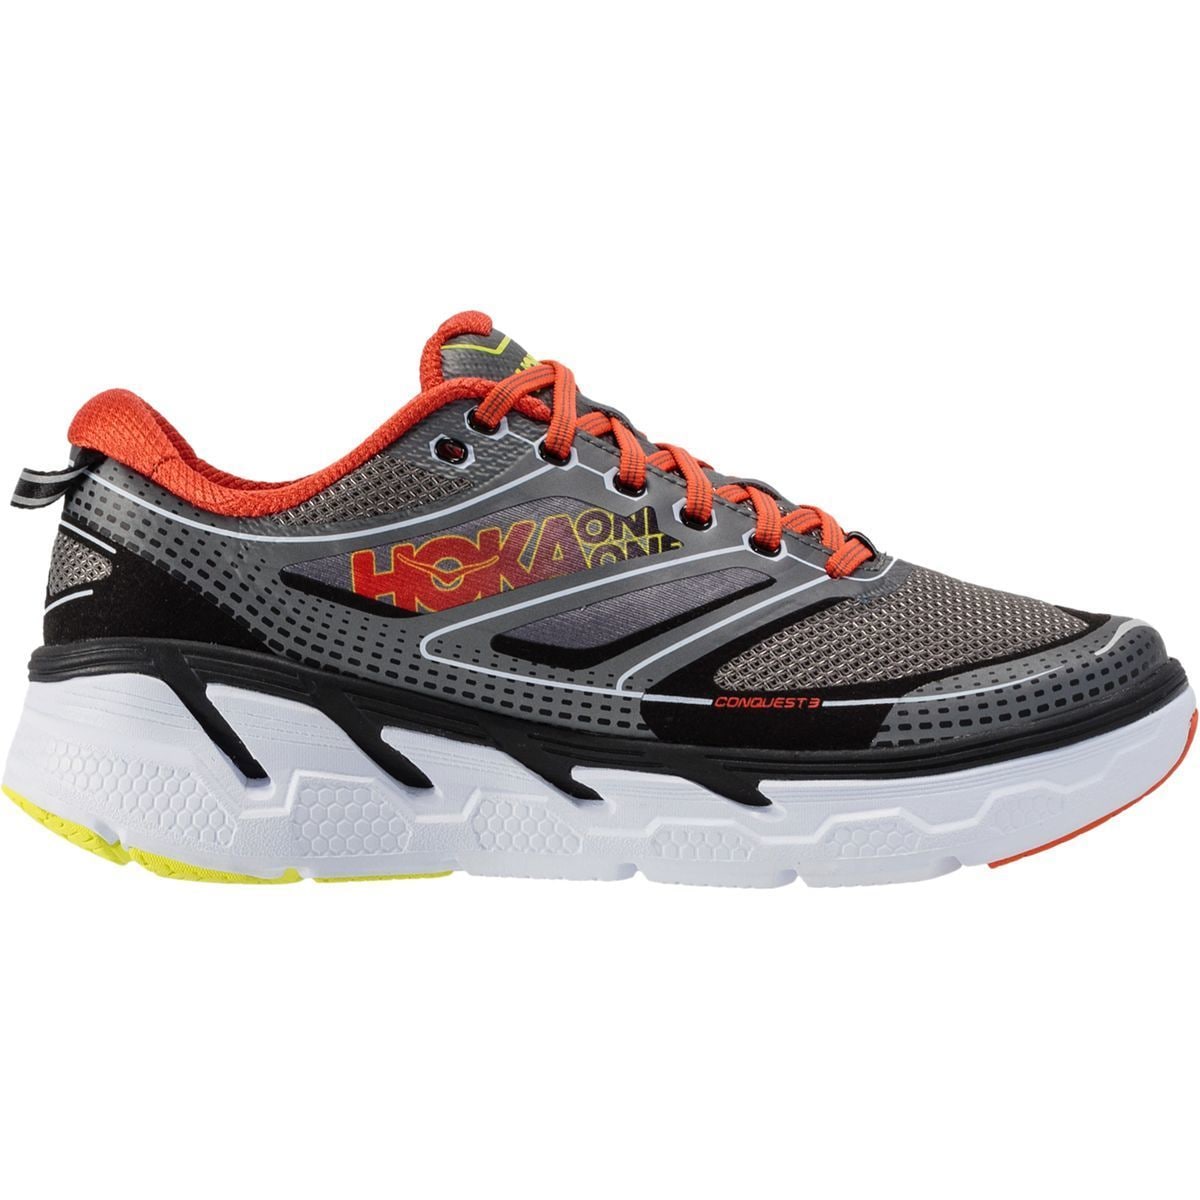 Hoka One One Conquest 3 Running Shoe Men's